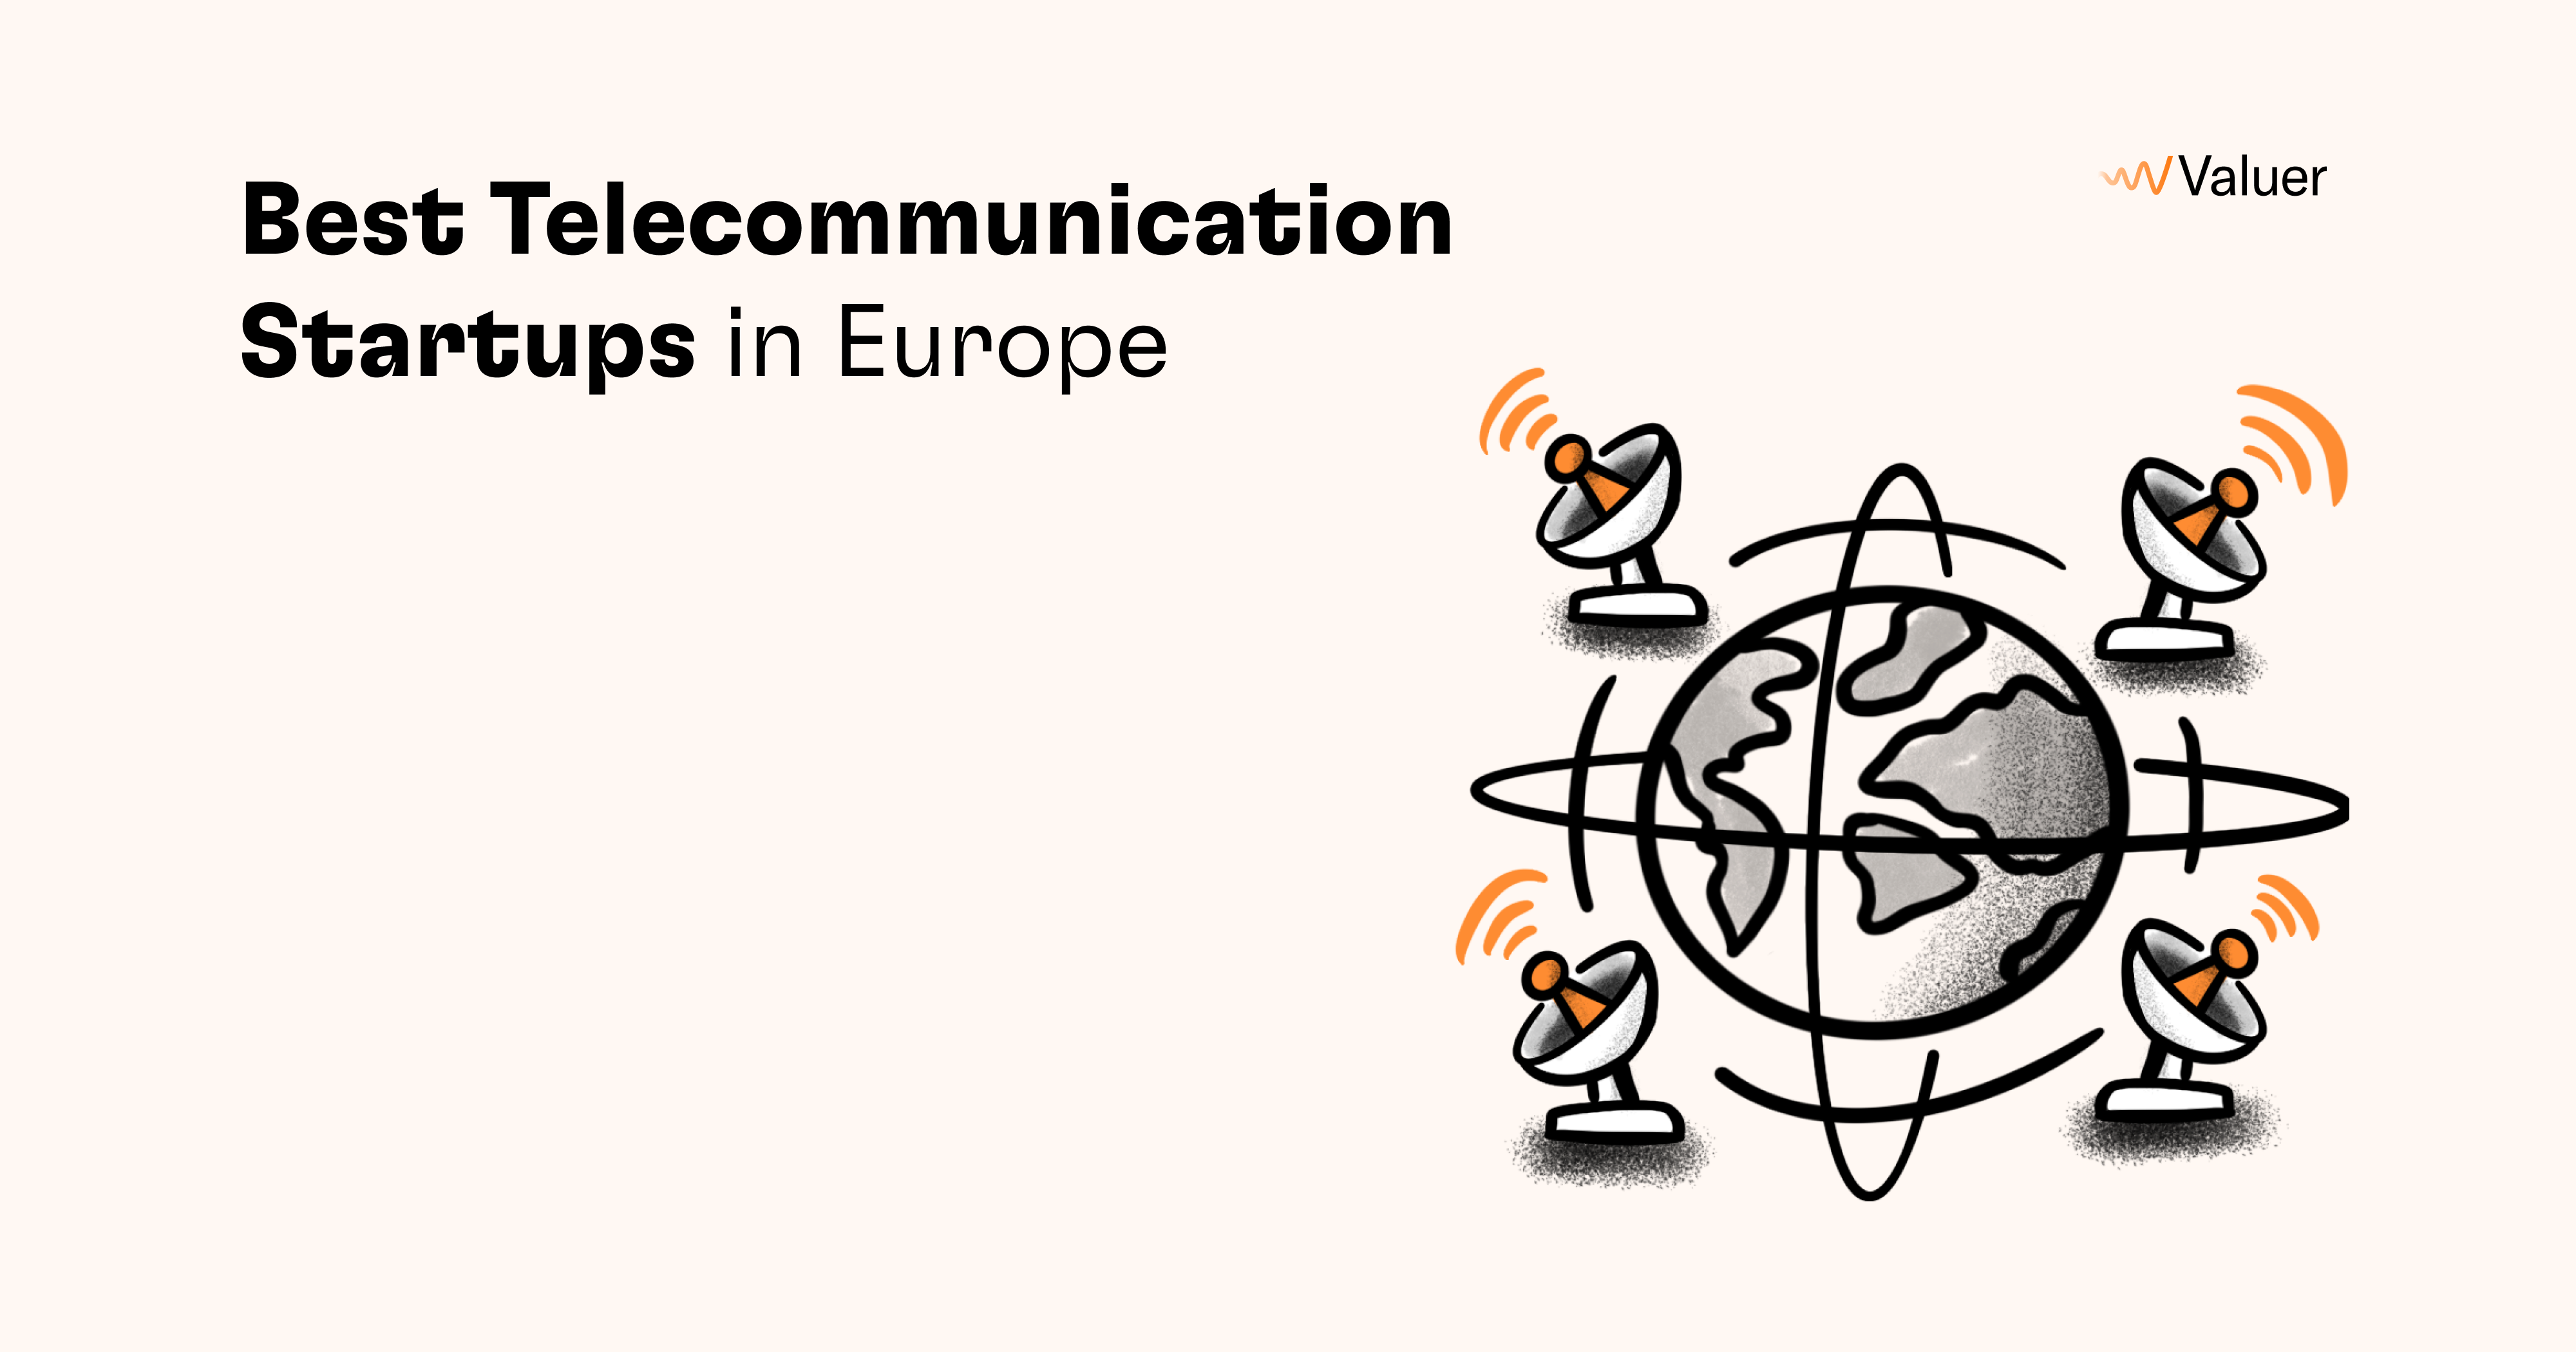 The Best Telecom Startups in Europe